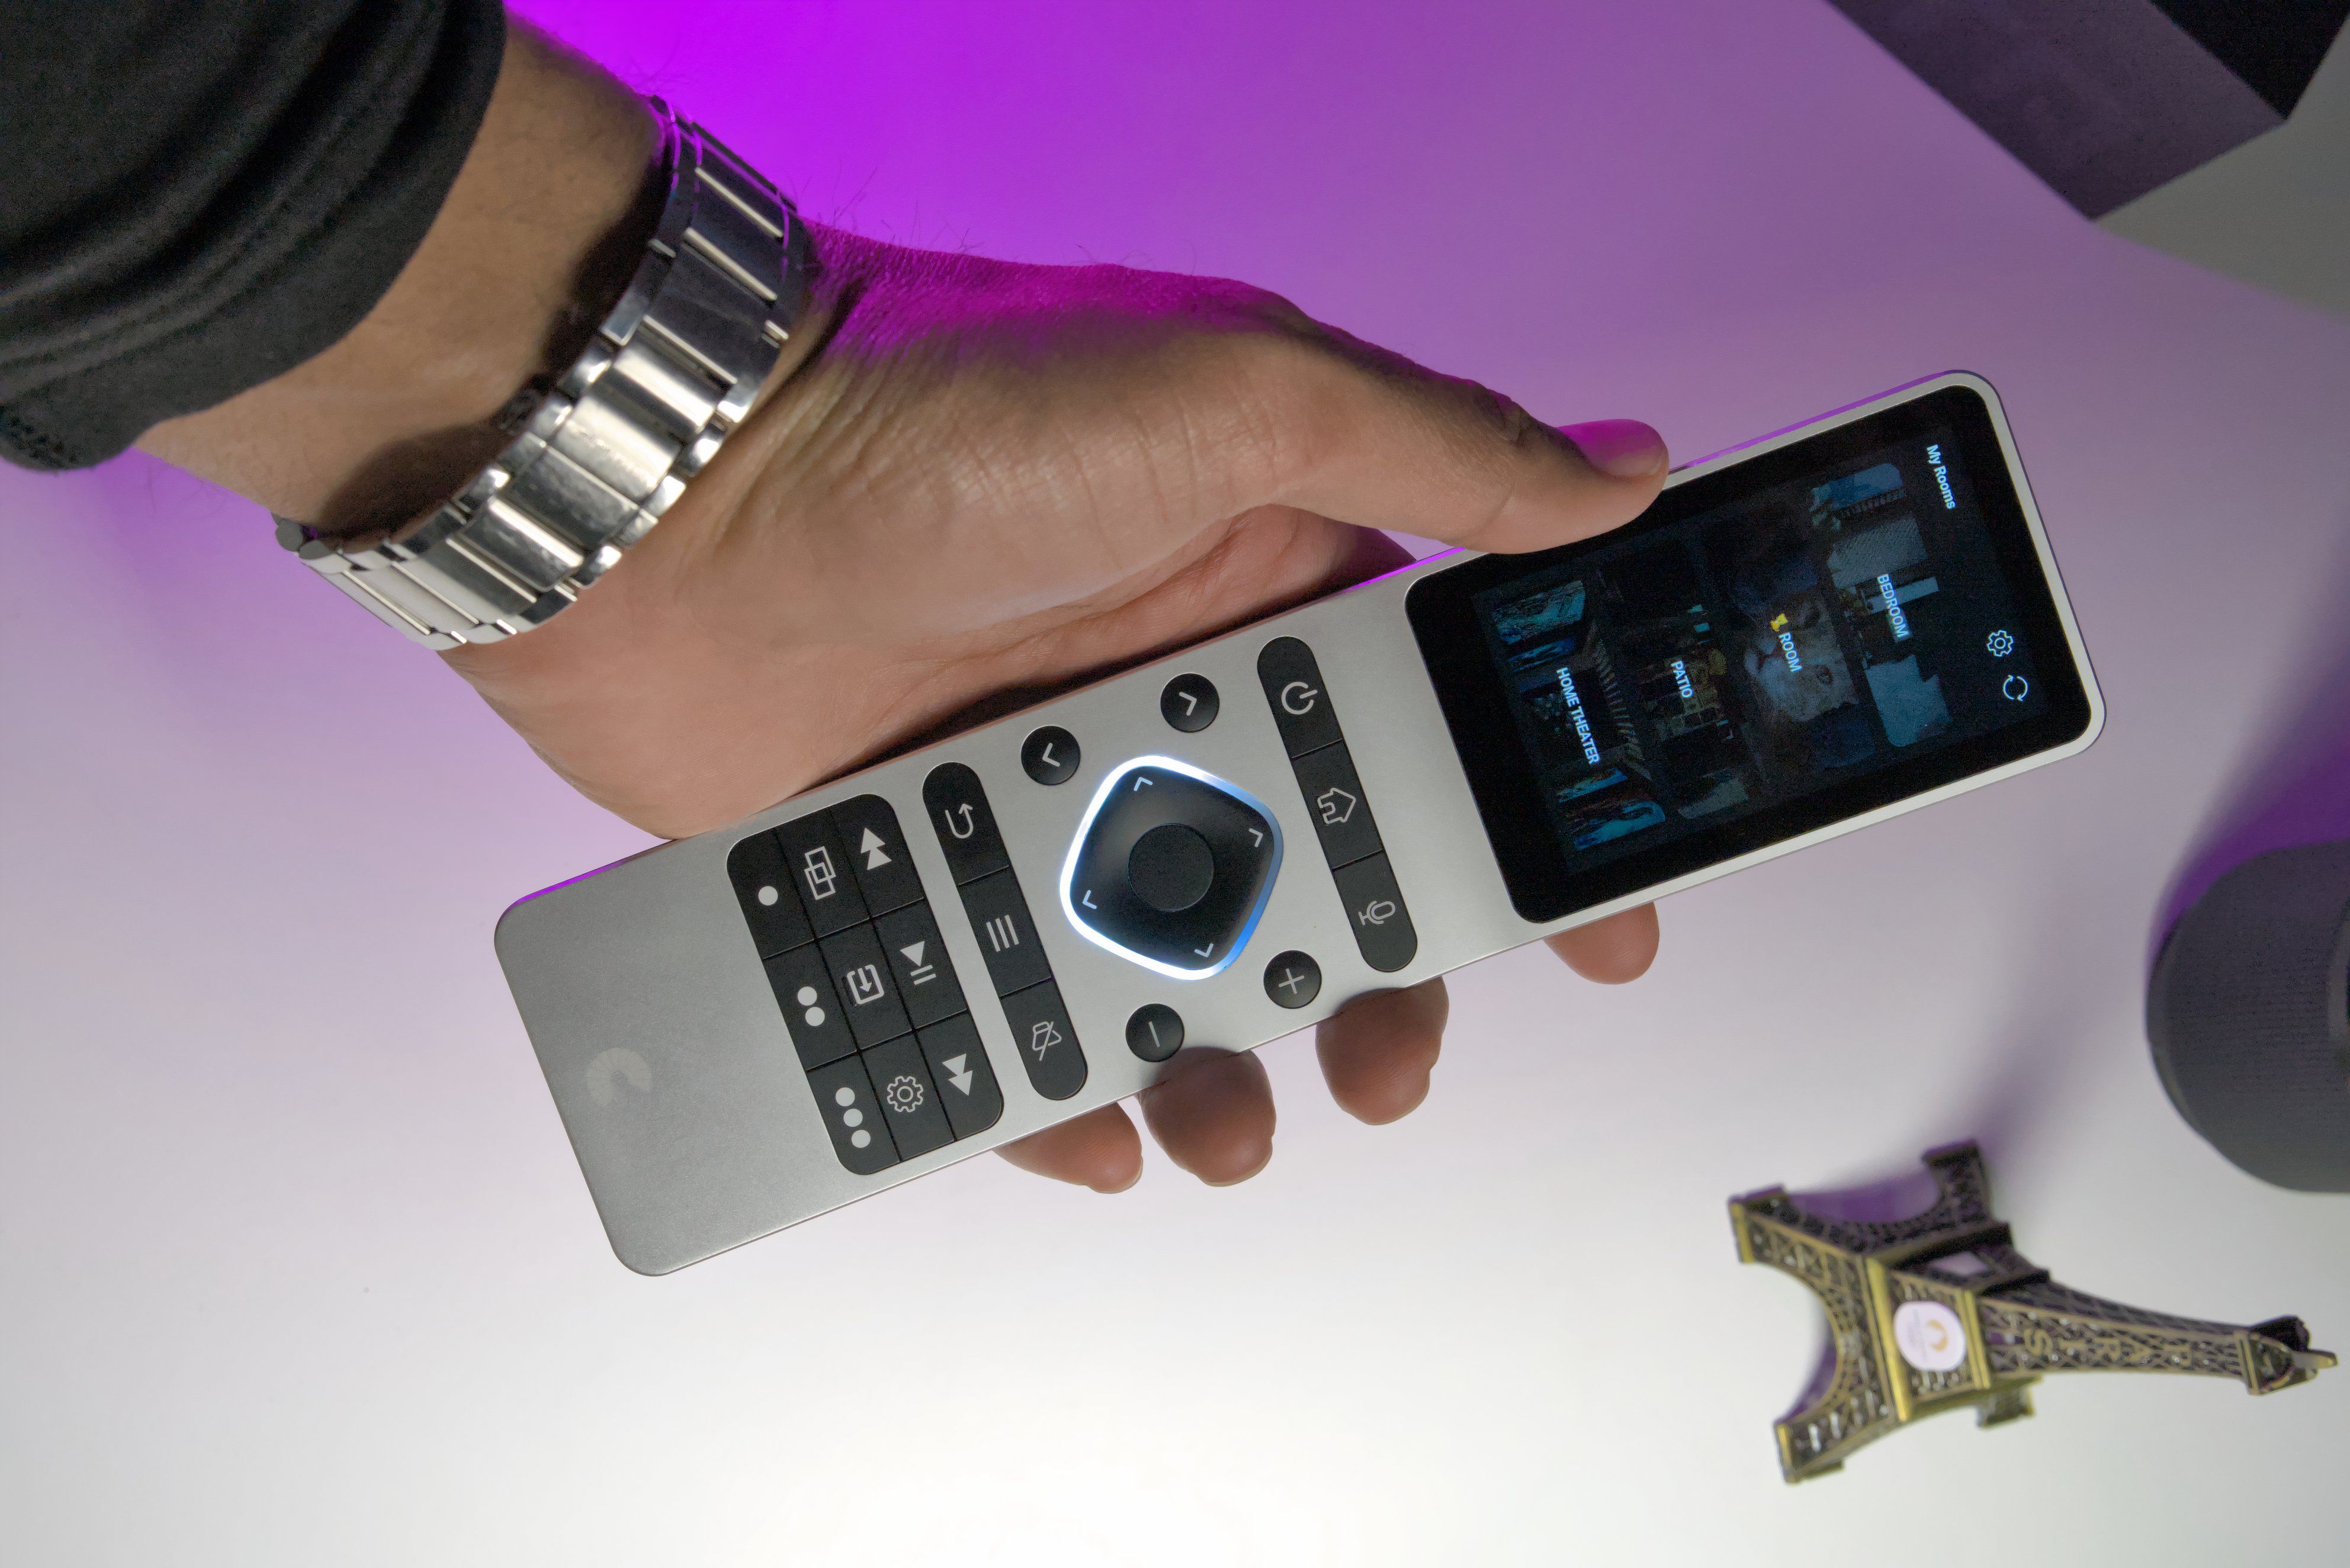 The Haptique remotes eliminate the need for a hub device by building all the necessary connectivity (IR, Bluetooth, Wi-Fi, ZigBee) directly into the remote itself.